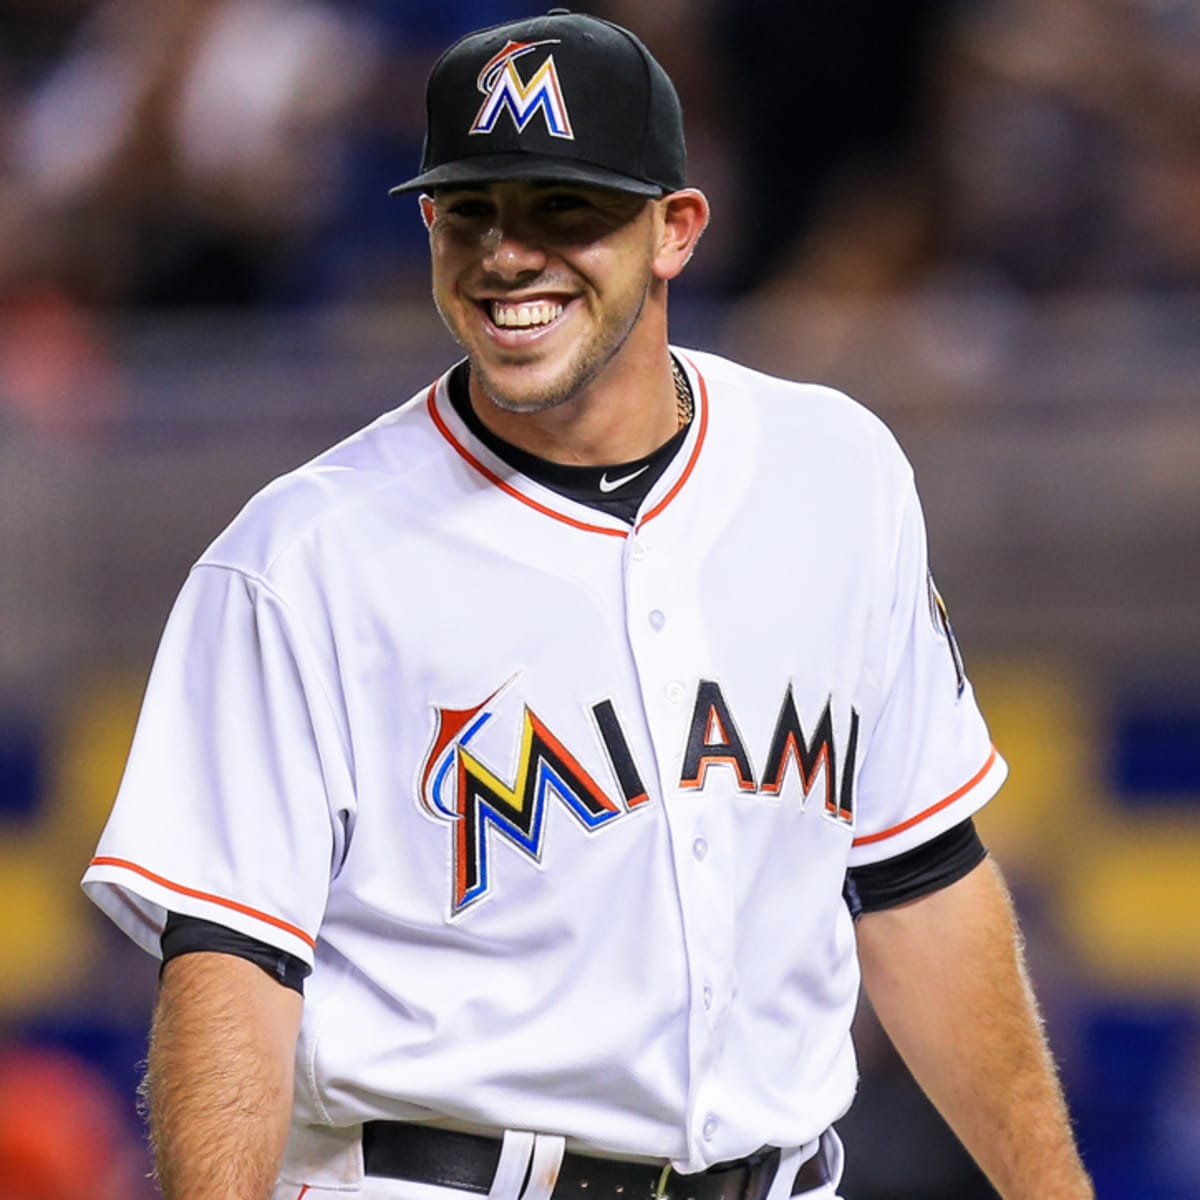 Jose Fernandez Cause of Death: How Did the Marlins Pitcher Die?